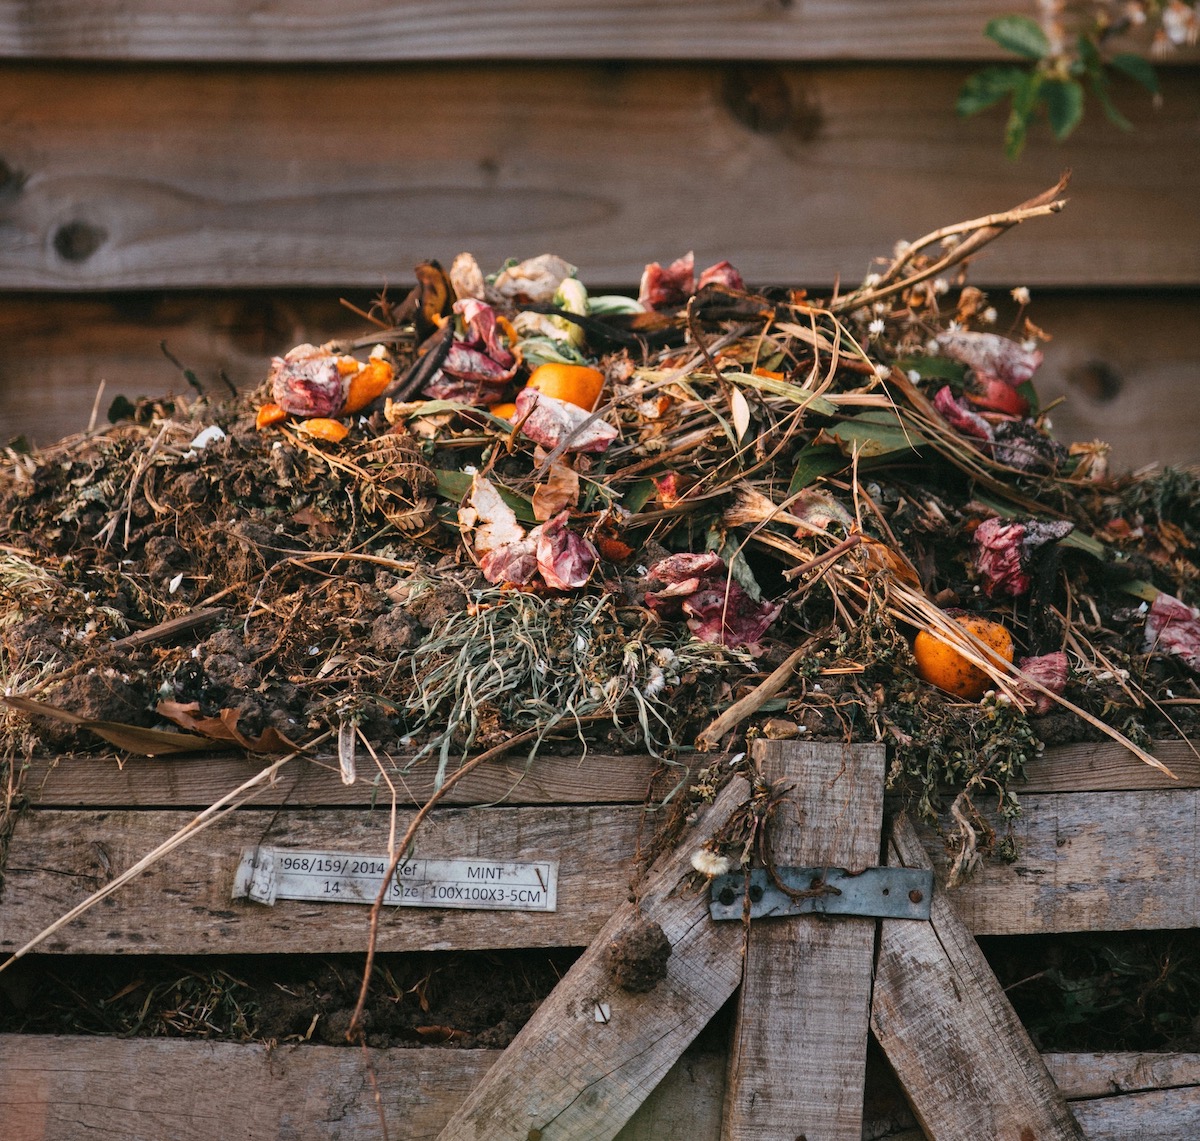 Getting the Most out of Compost